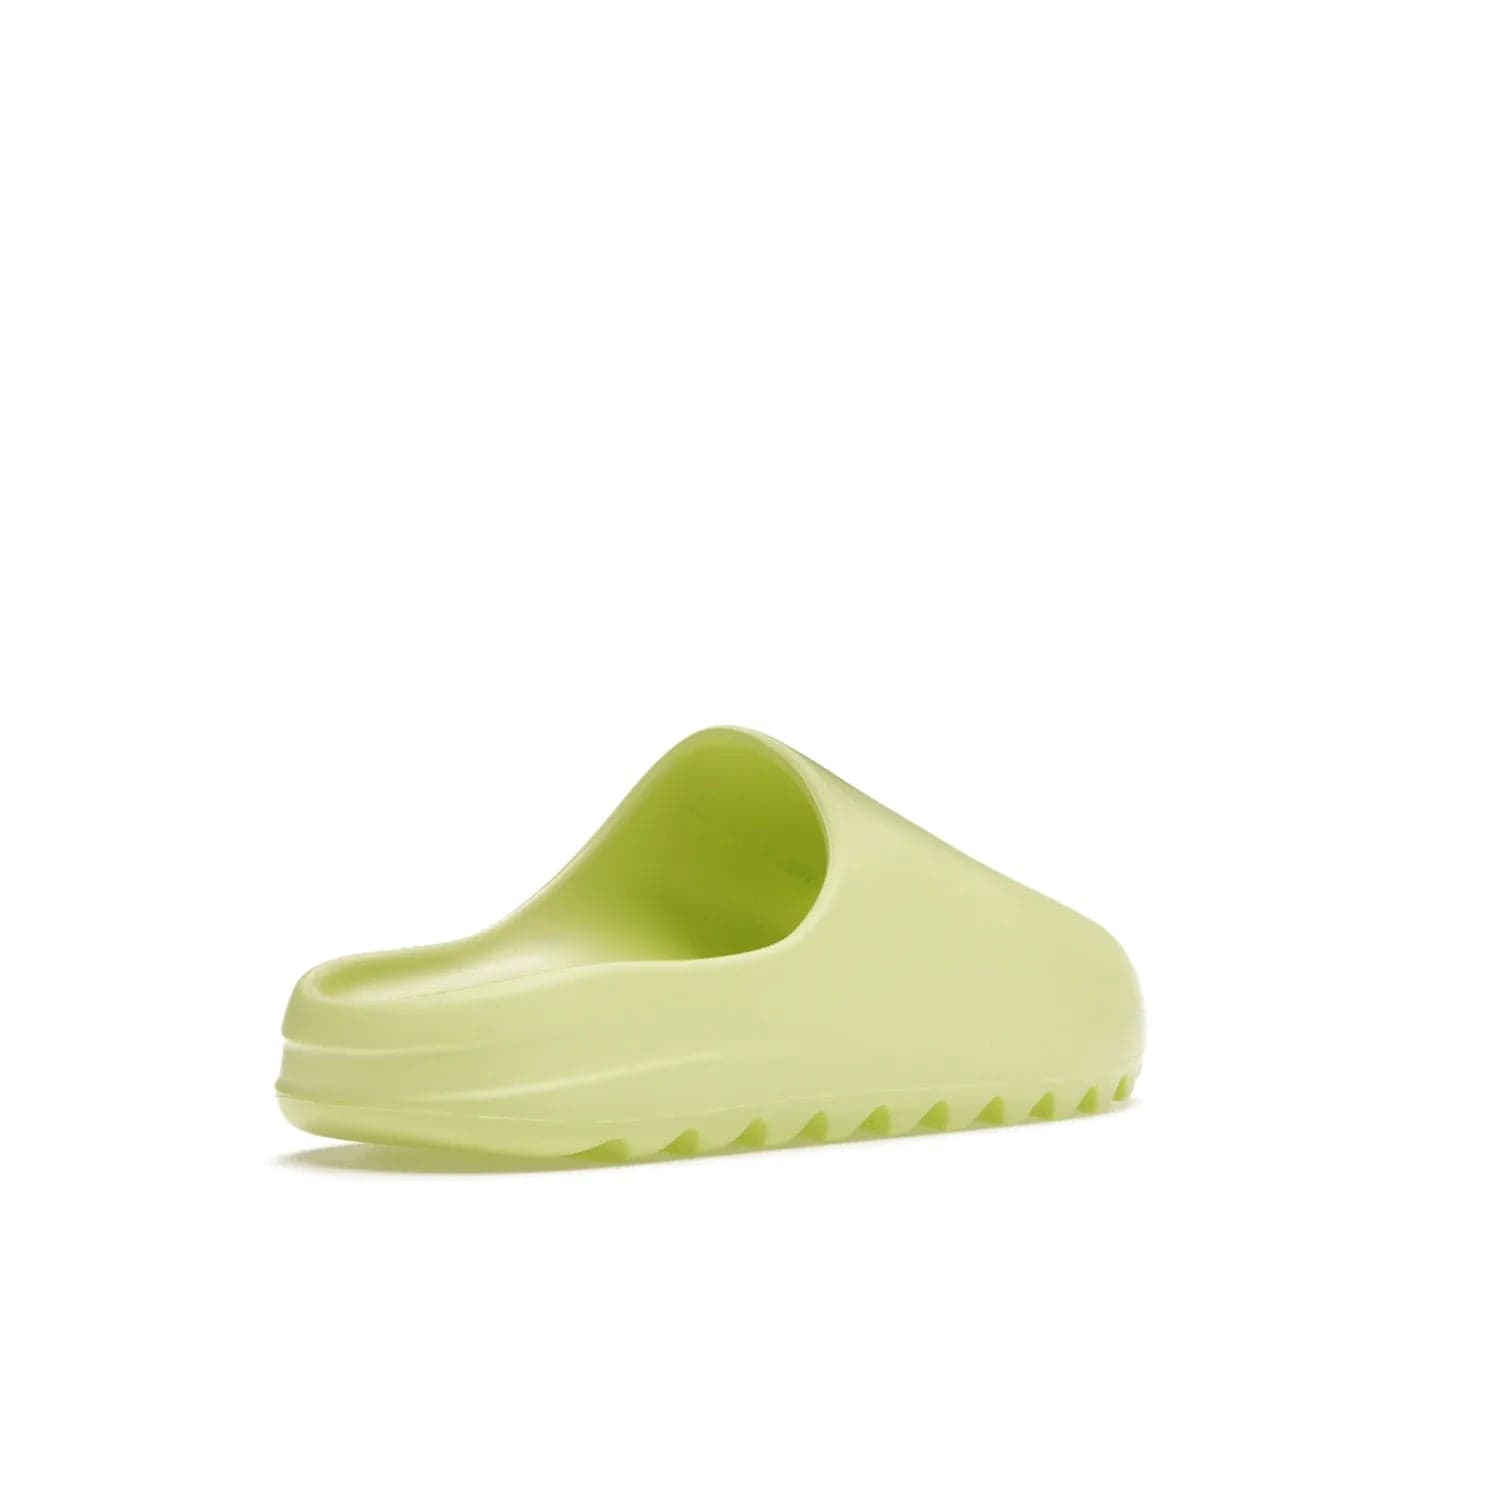 adidas Yeezy Slide Glow Green - Image 32 - Only at www.BallersClubKickz.com - Experience an unexpected summer style with the adidas Yeezy Slide Glow Green. This limited edition slide sandal provides a lightweight and durable construction and a bold Glow Green hue. Strategic grooves enhance traction and provide all-day comfort. Make a statement with the adidas Yeezy Slide Glow Green.